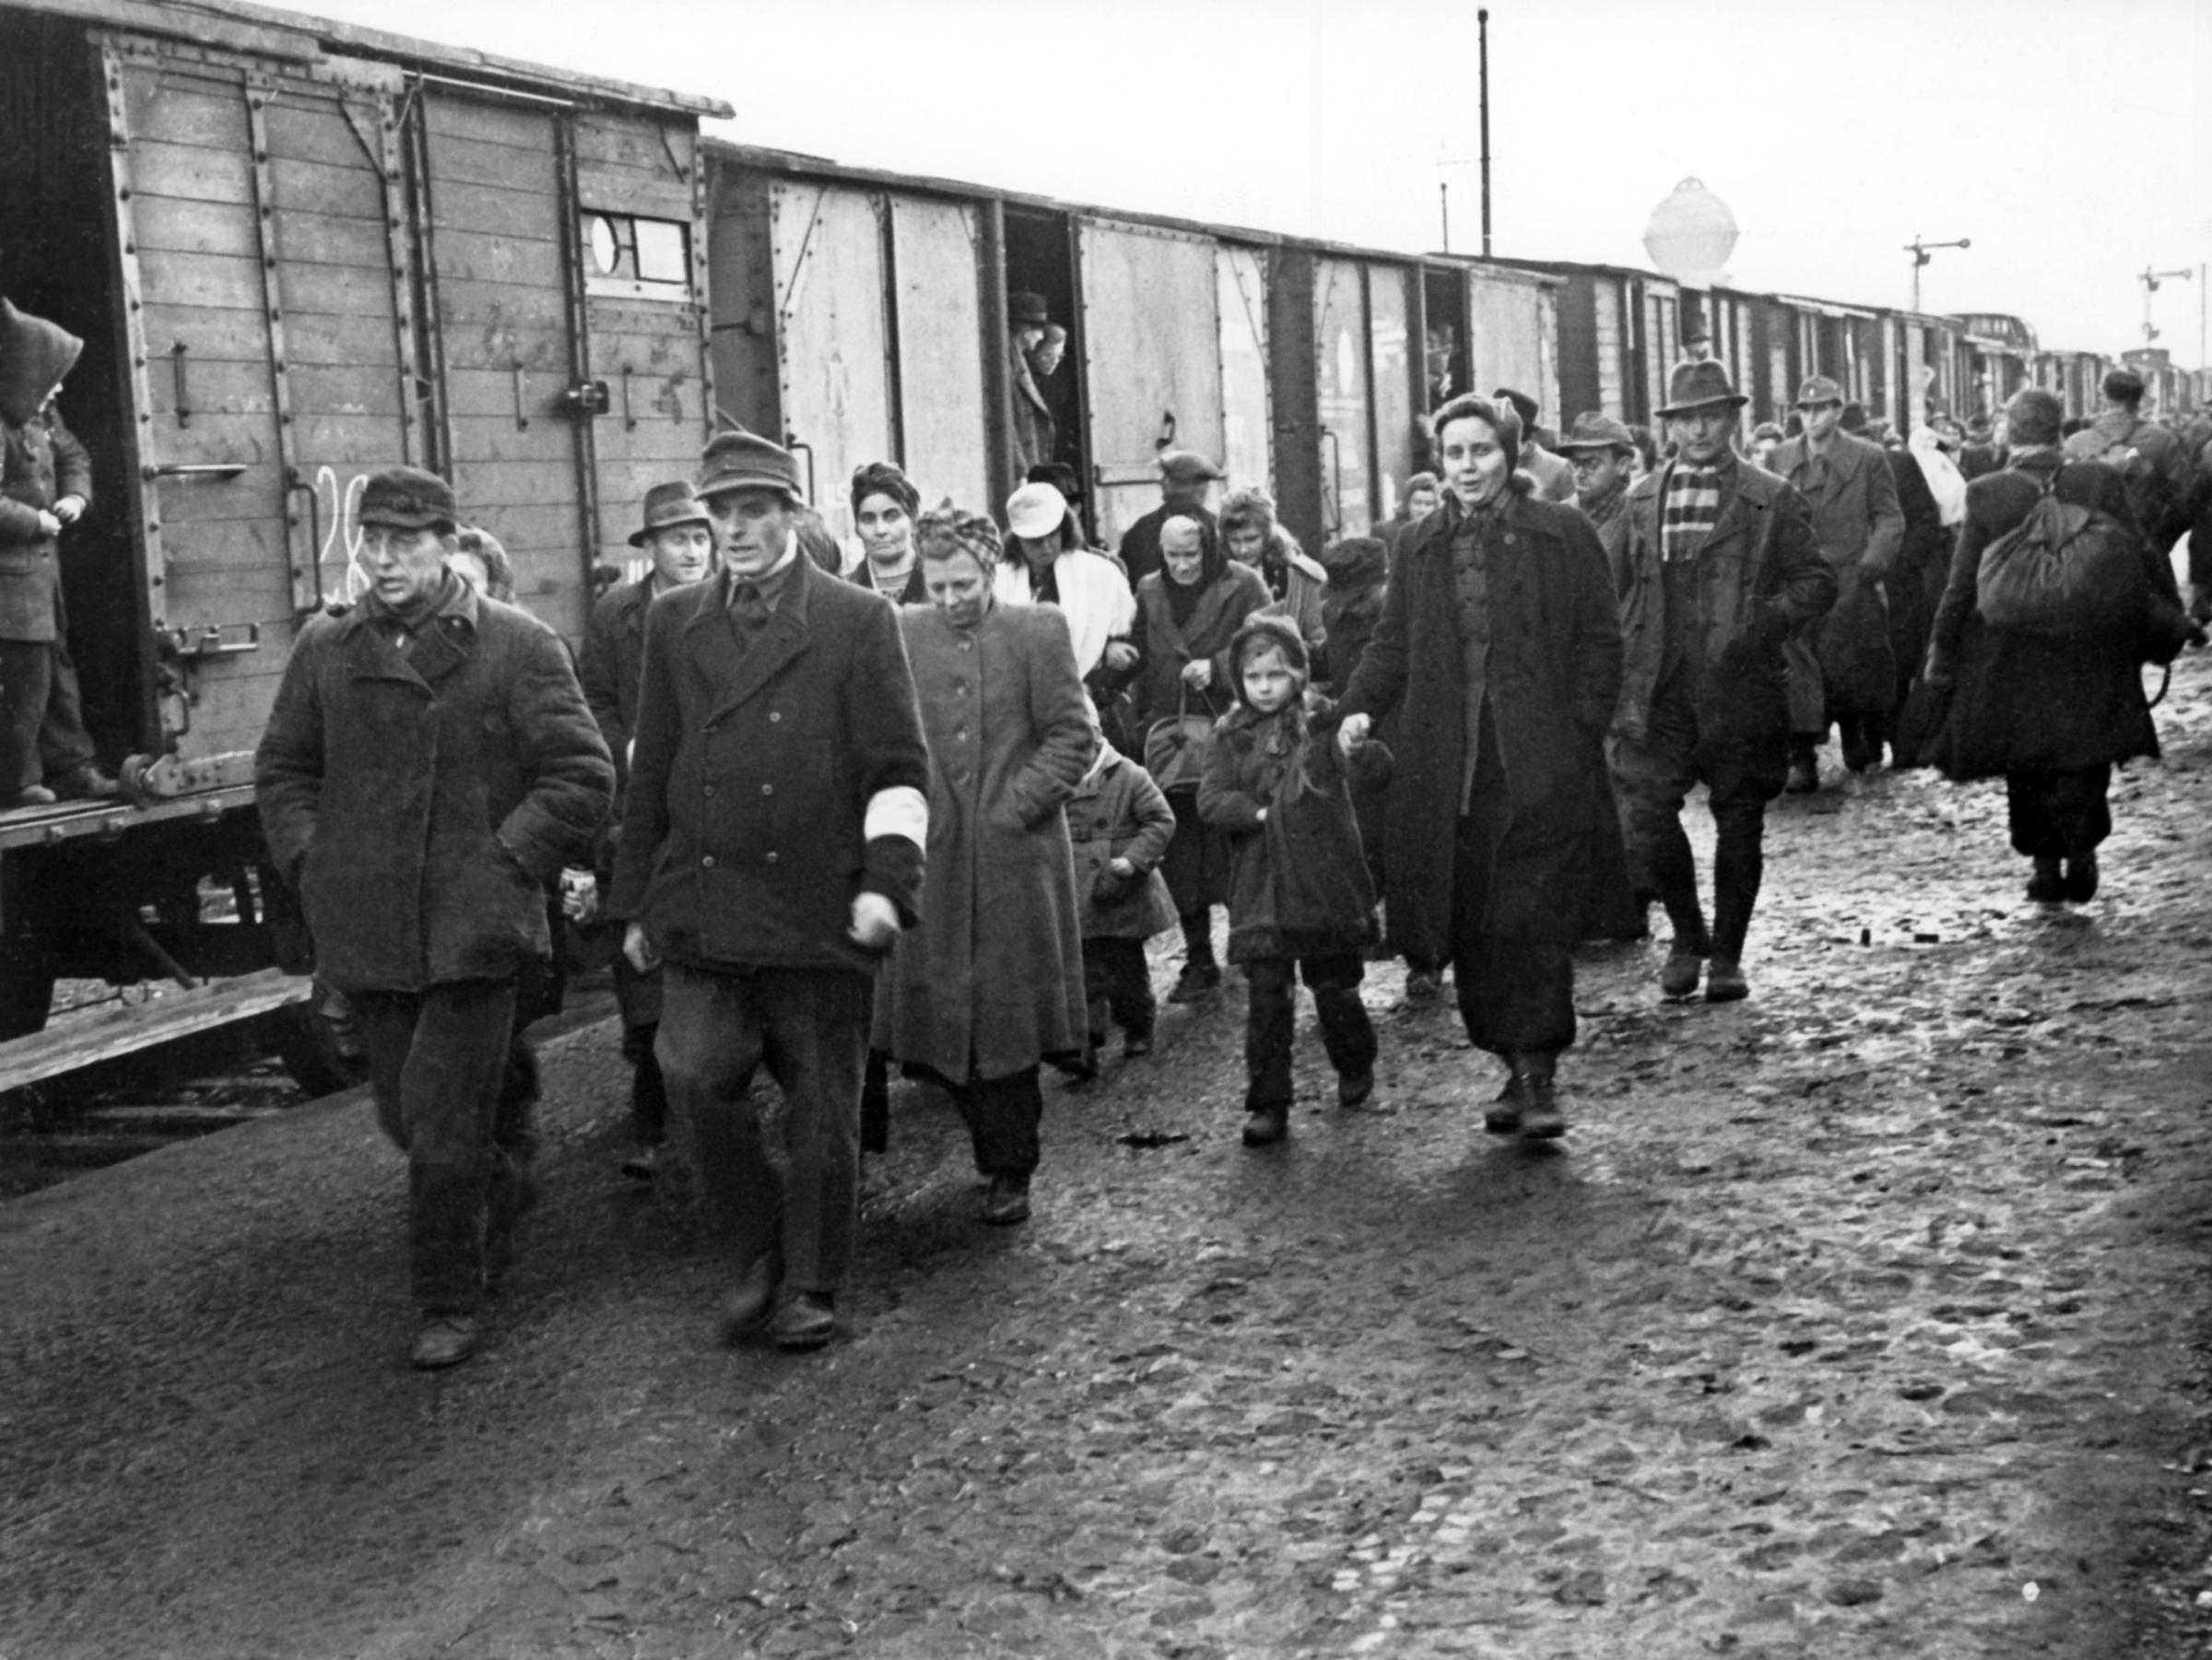 An attendant with white brassard (front, r) accompanies newly arrived refugees, in January 1946, through the refugee camp in Bebra.